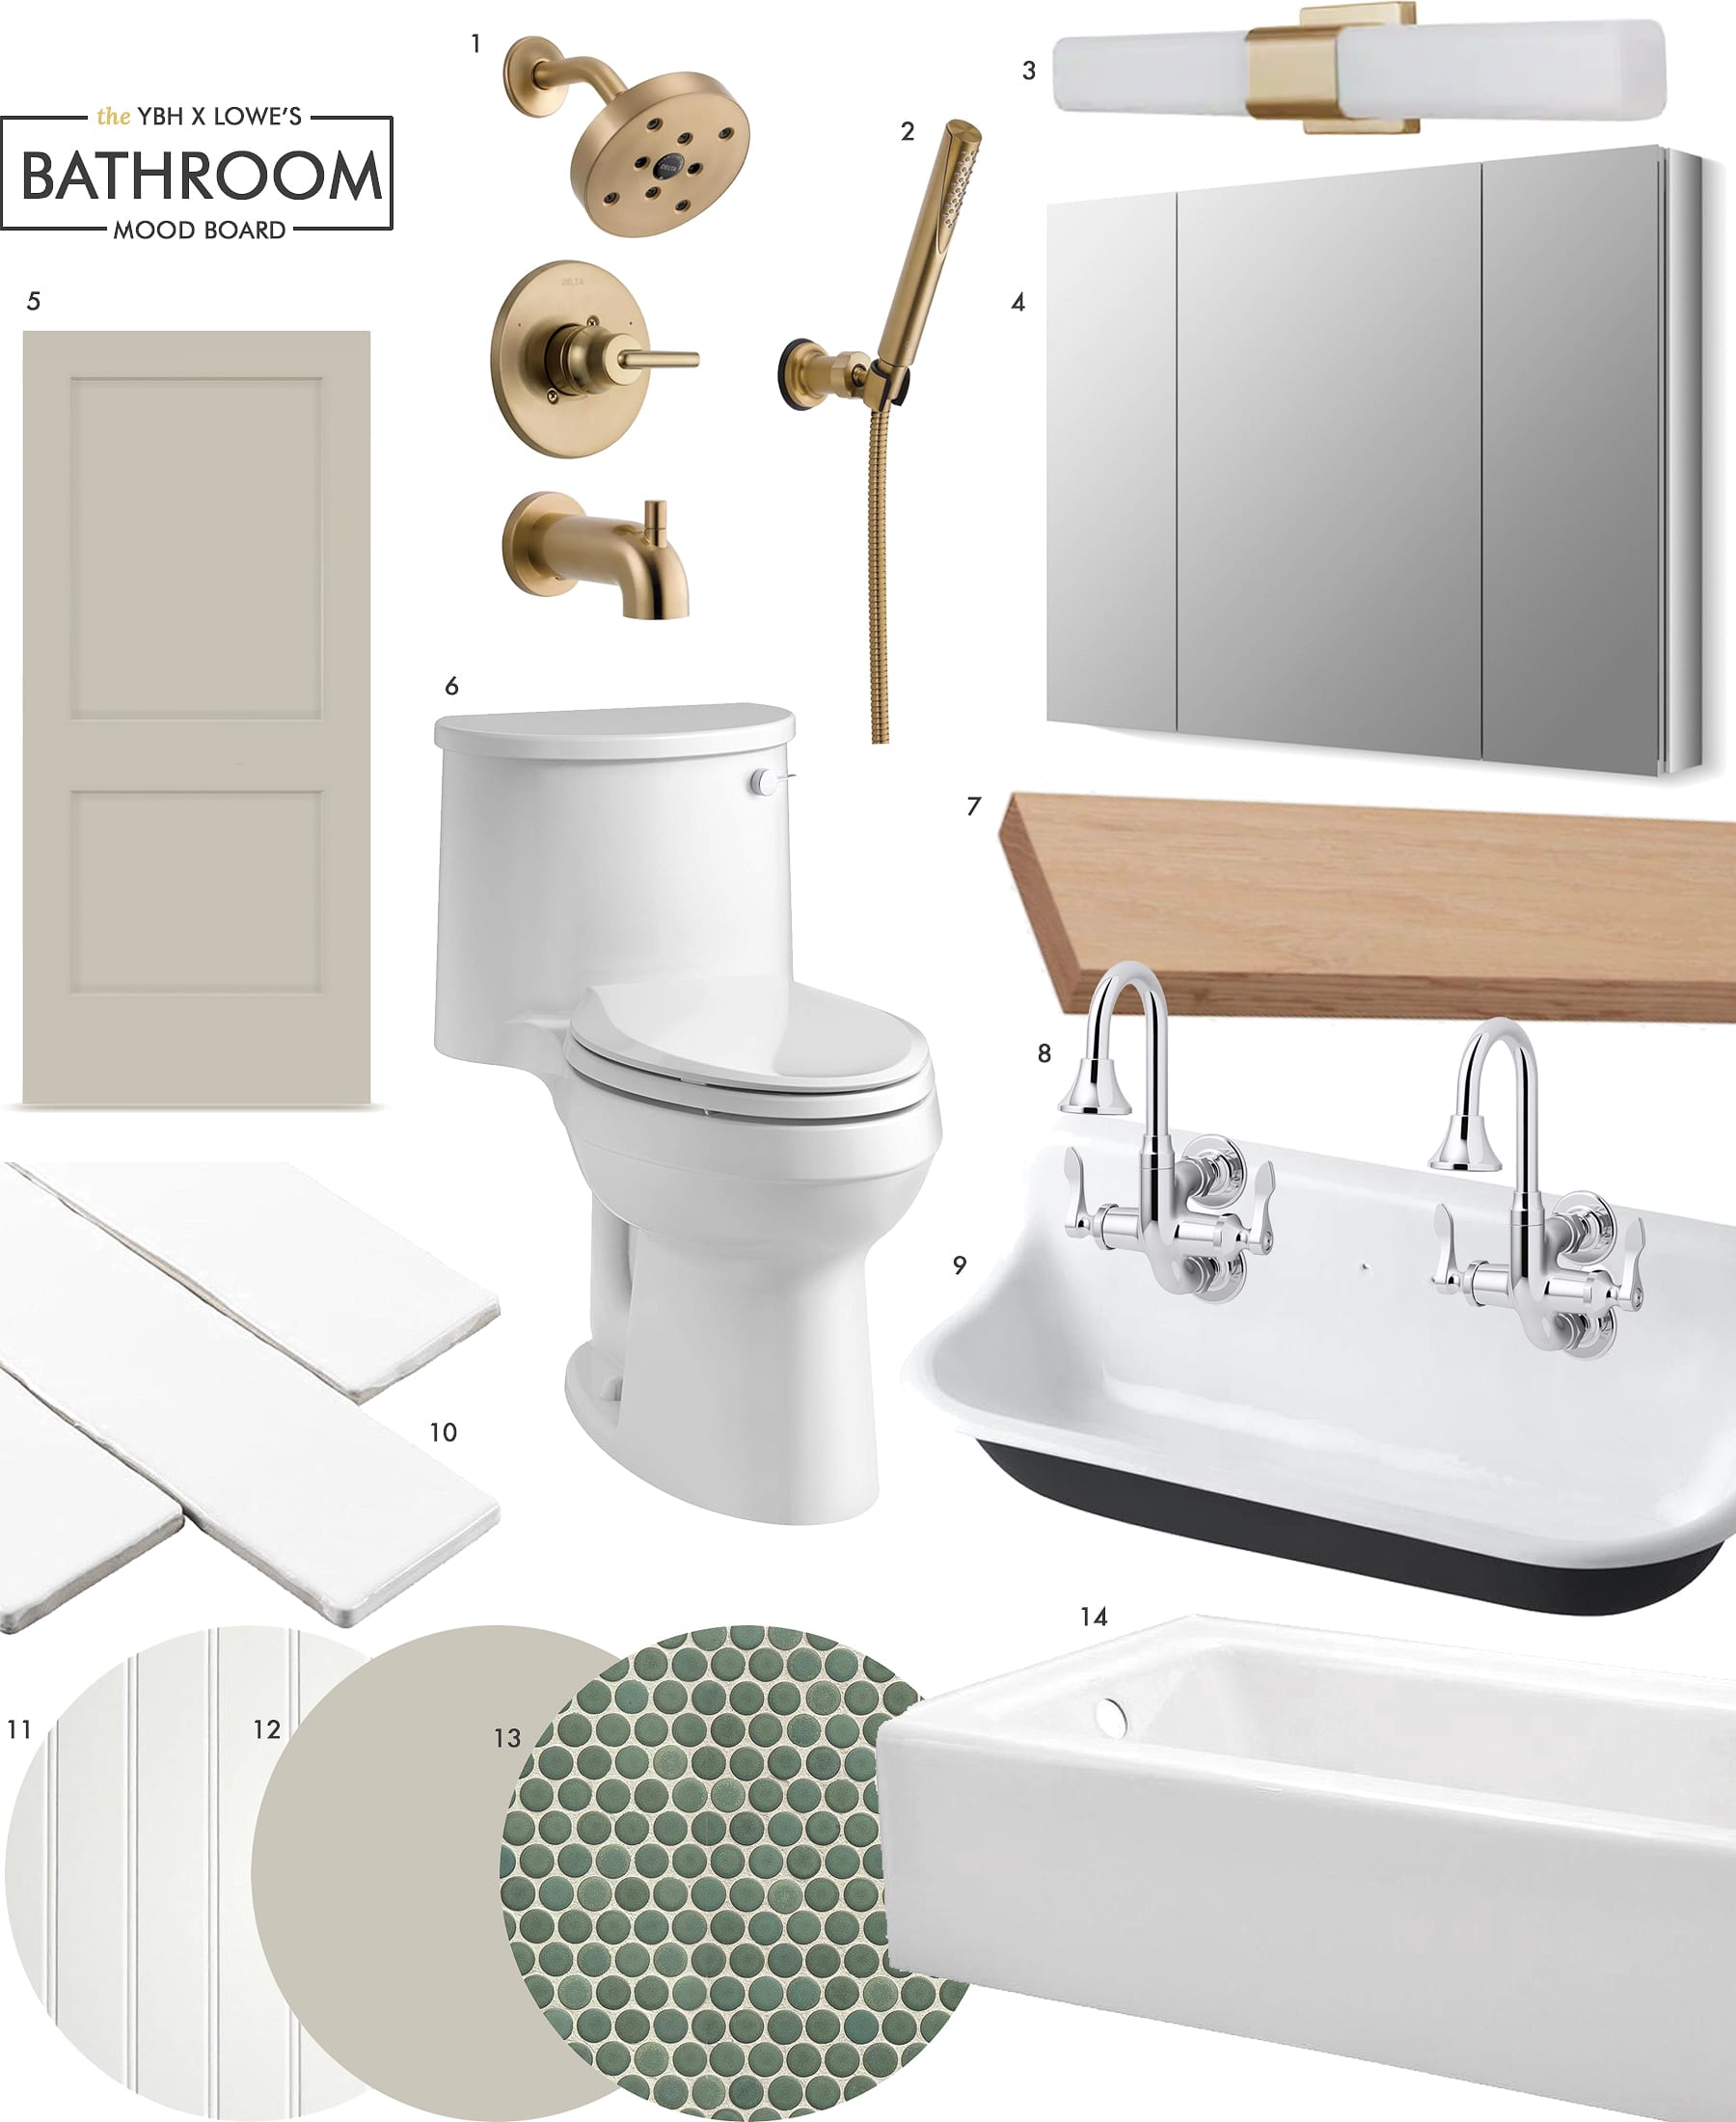 A bathroom mood board using green, greige and brass via Yellow Brick Home, in partnership with Lowe's Home Improvement. #lowesparter #ad